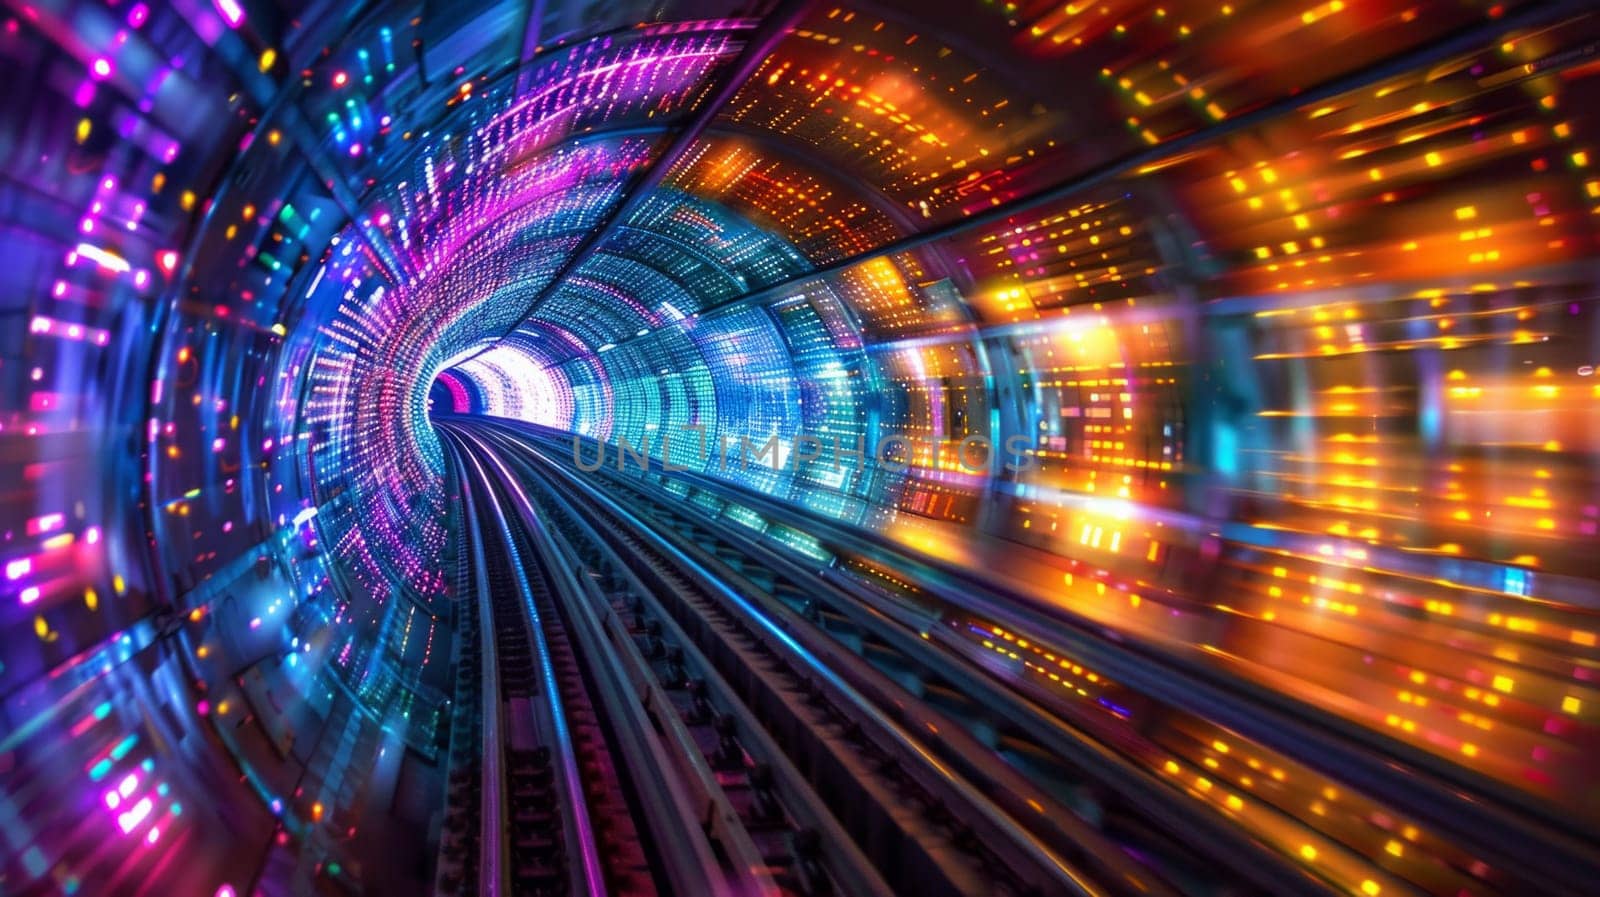 Futuristic multicolored tunnel background illustrating fast communications by papatonic